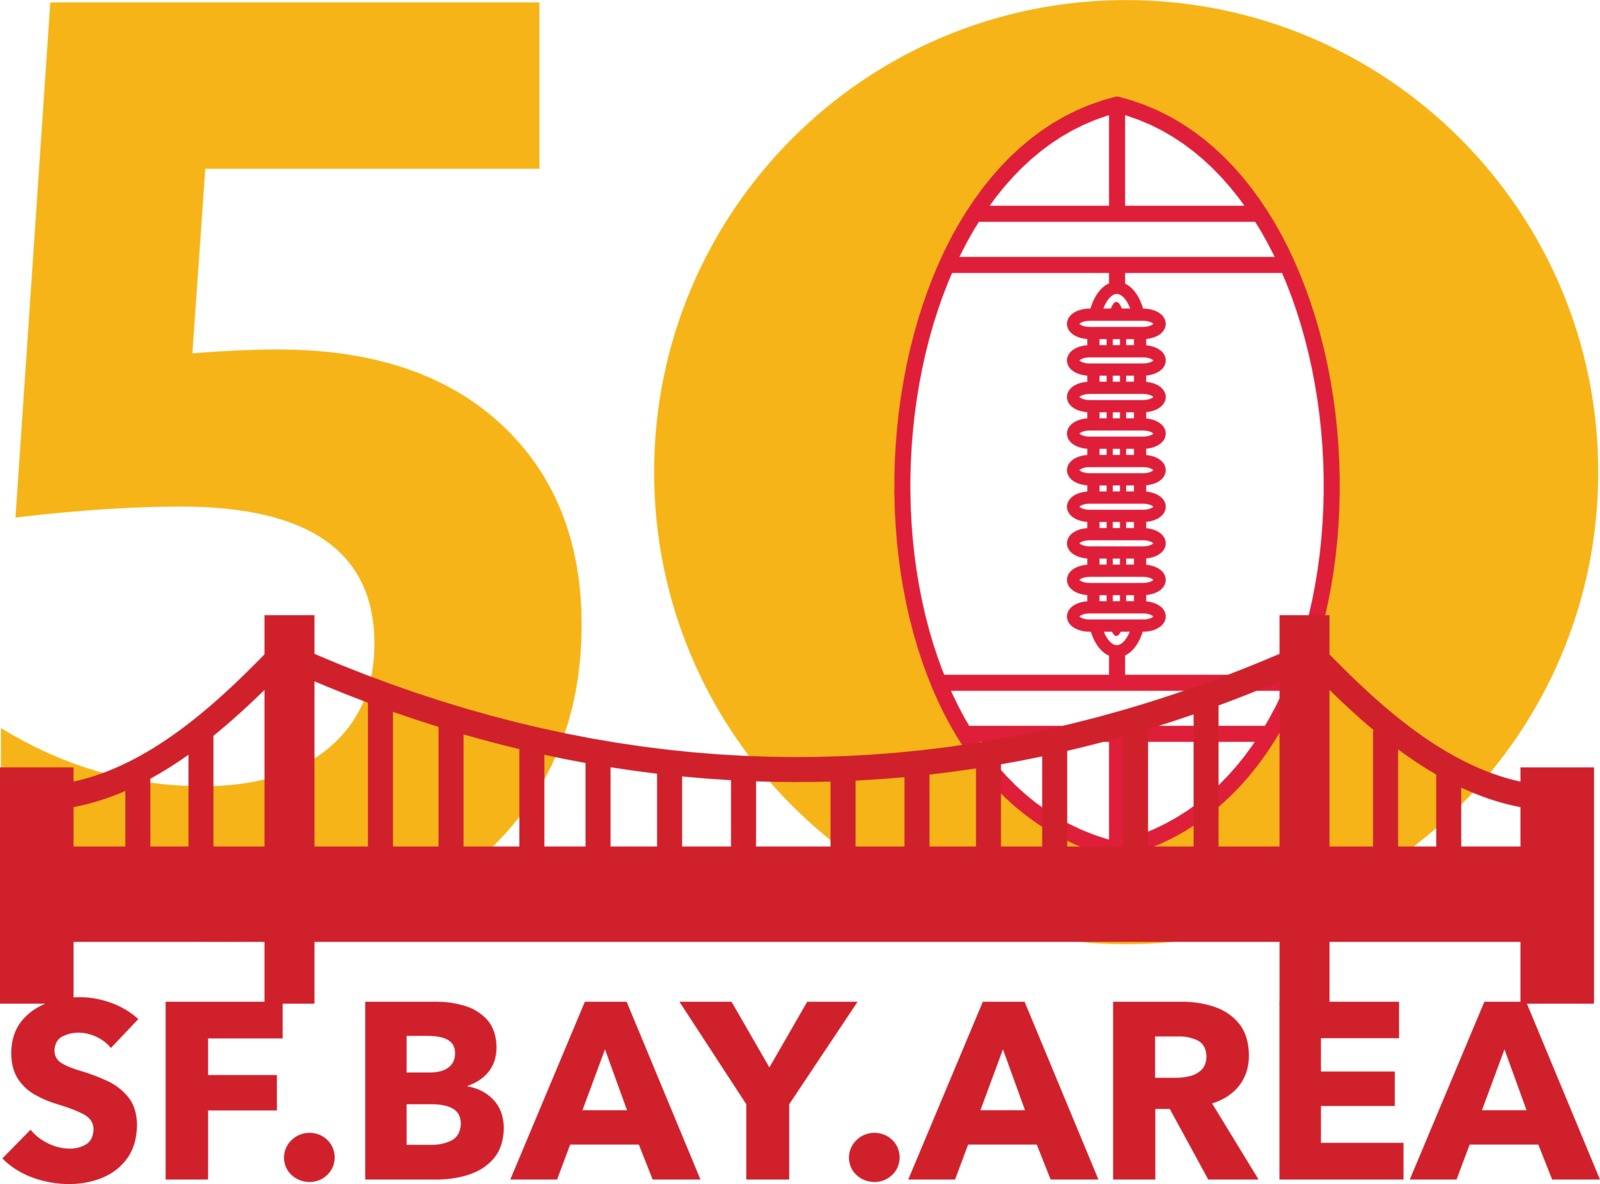 Illustration showing number 50 with American football and golden gate bridge with words San Francisco Bay area for the pro football championship.